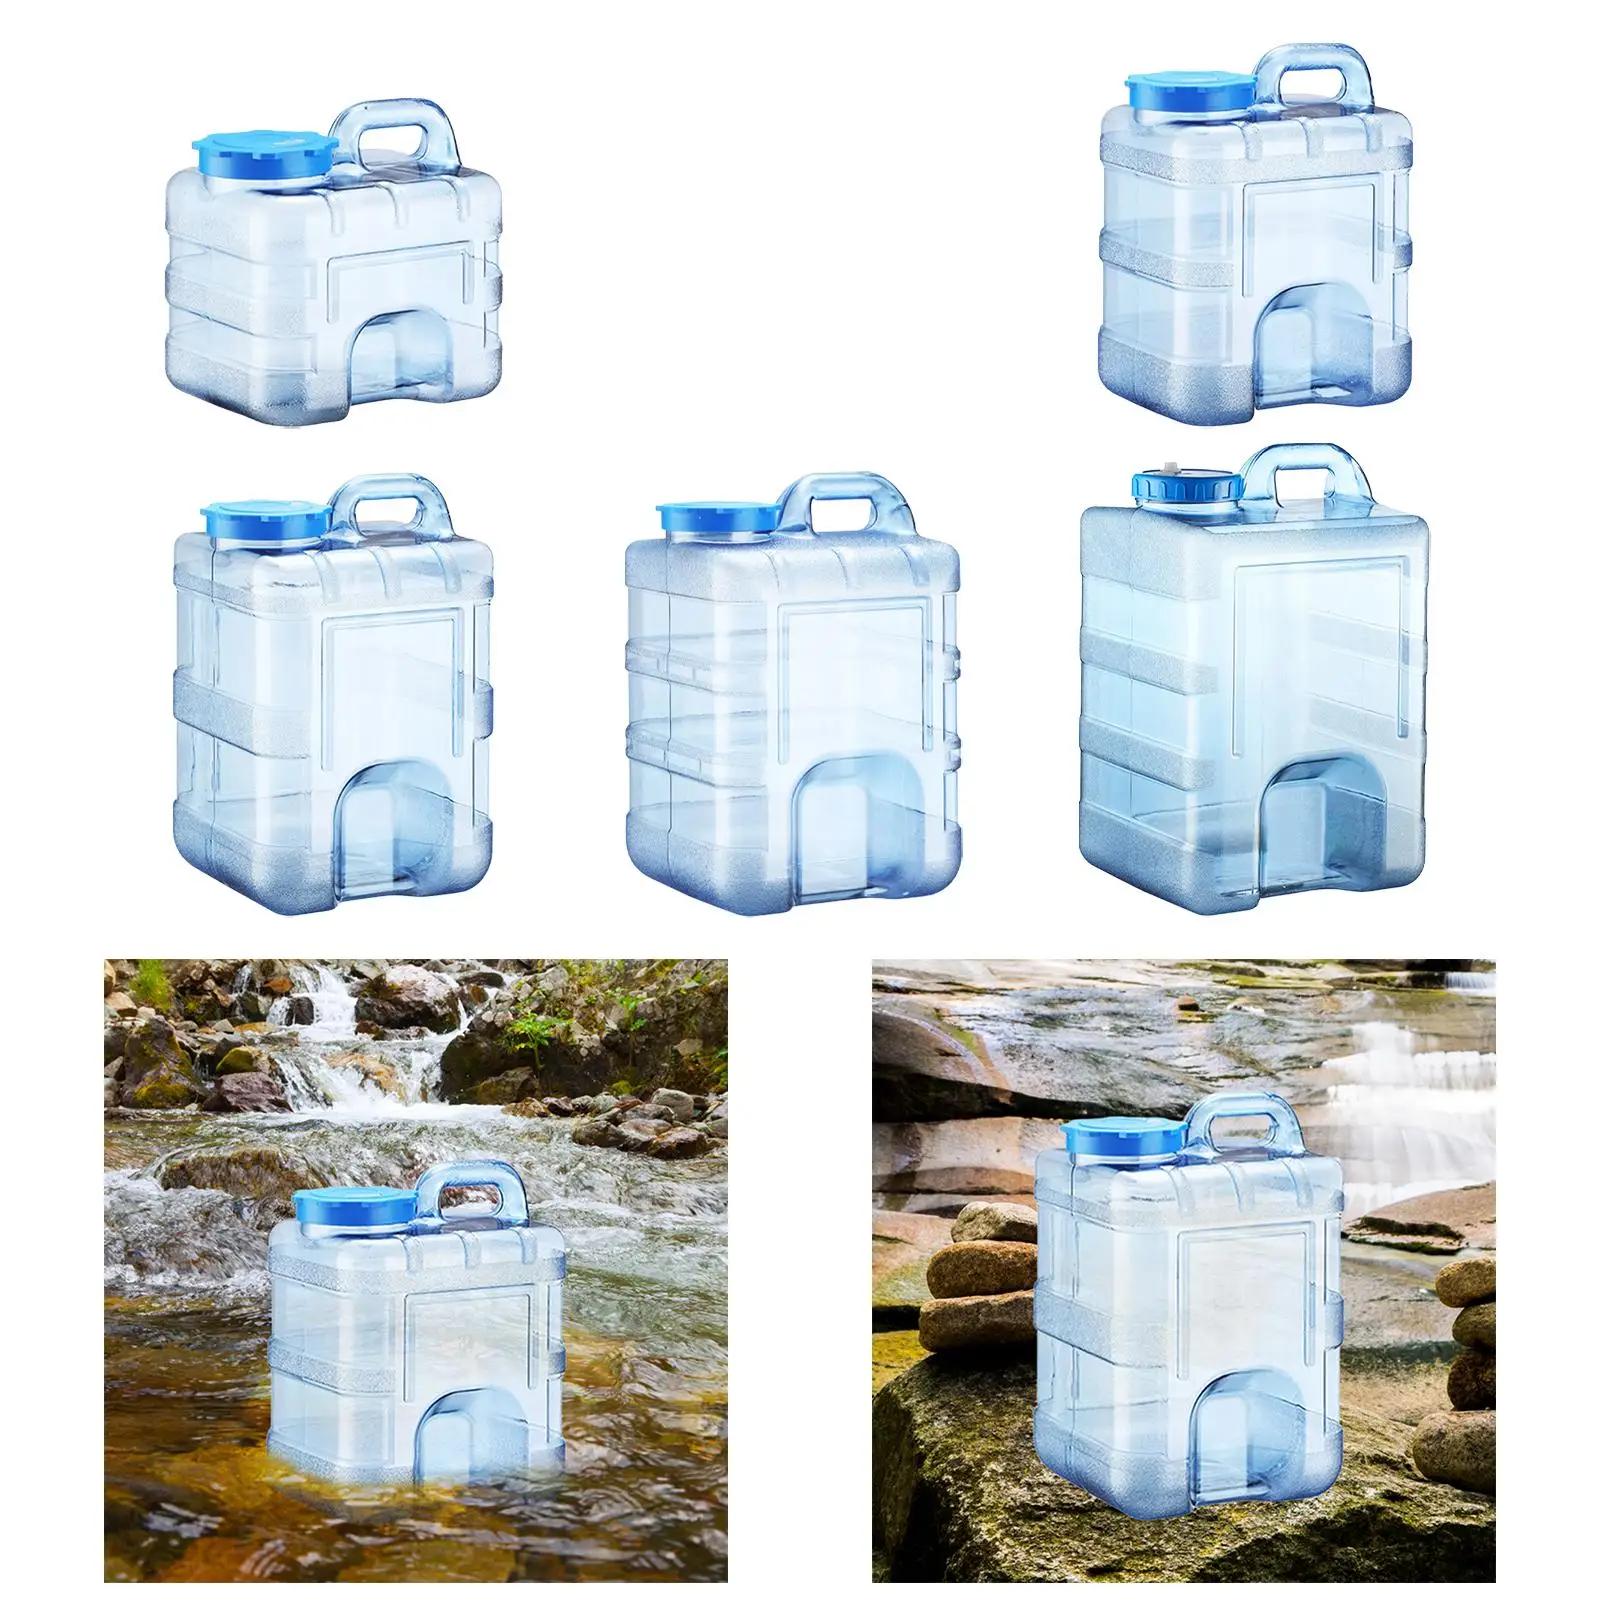 Camping Water Container, Water Storage Bucket, Water Bottle Carrier for Backpacking